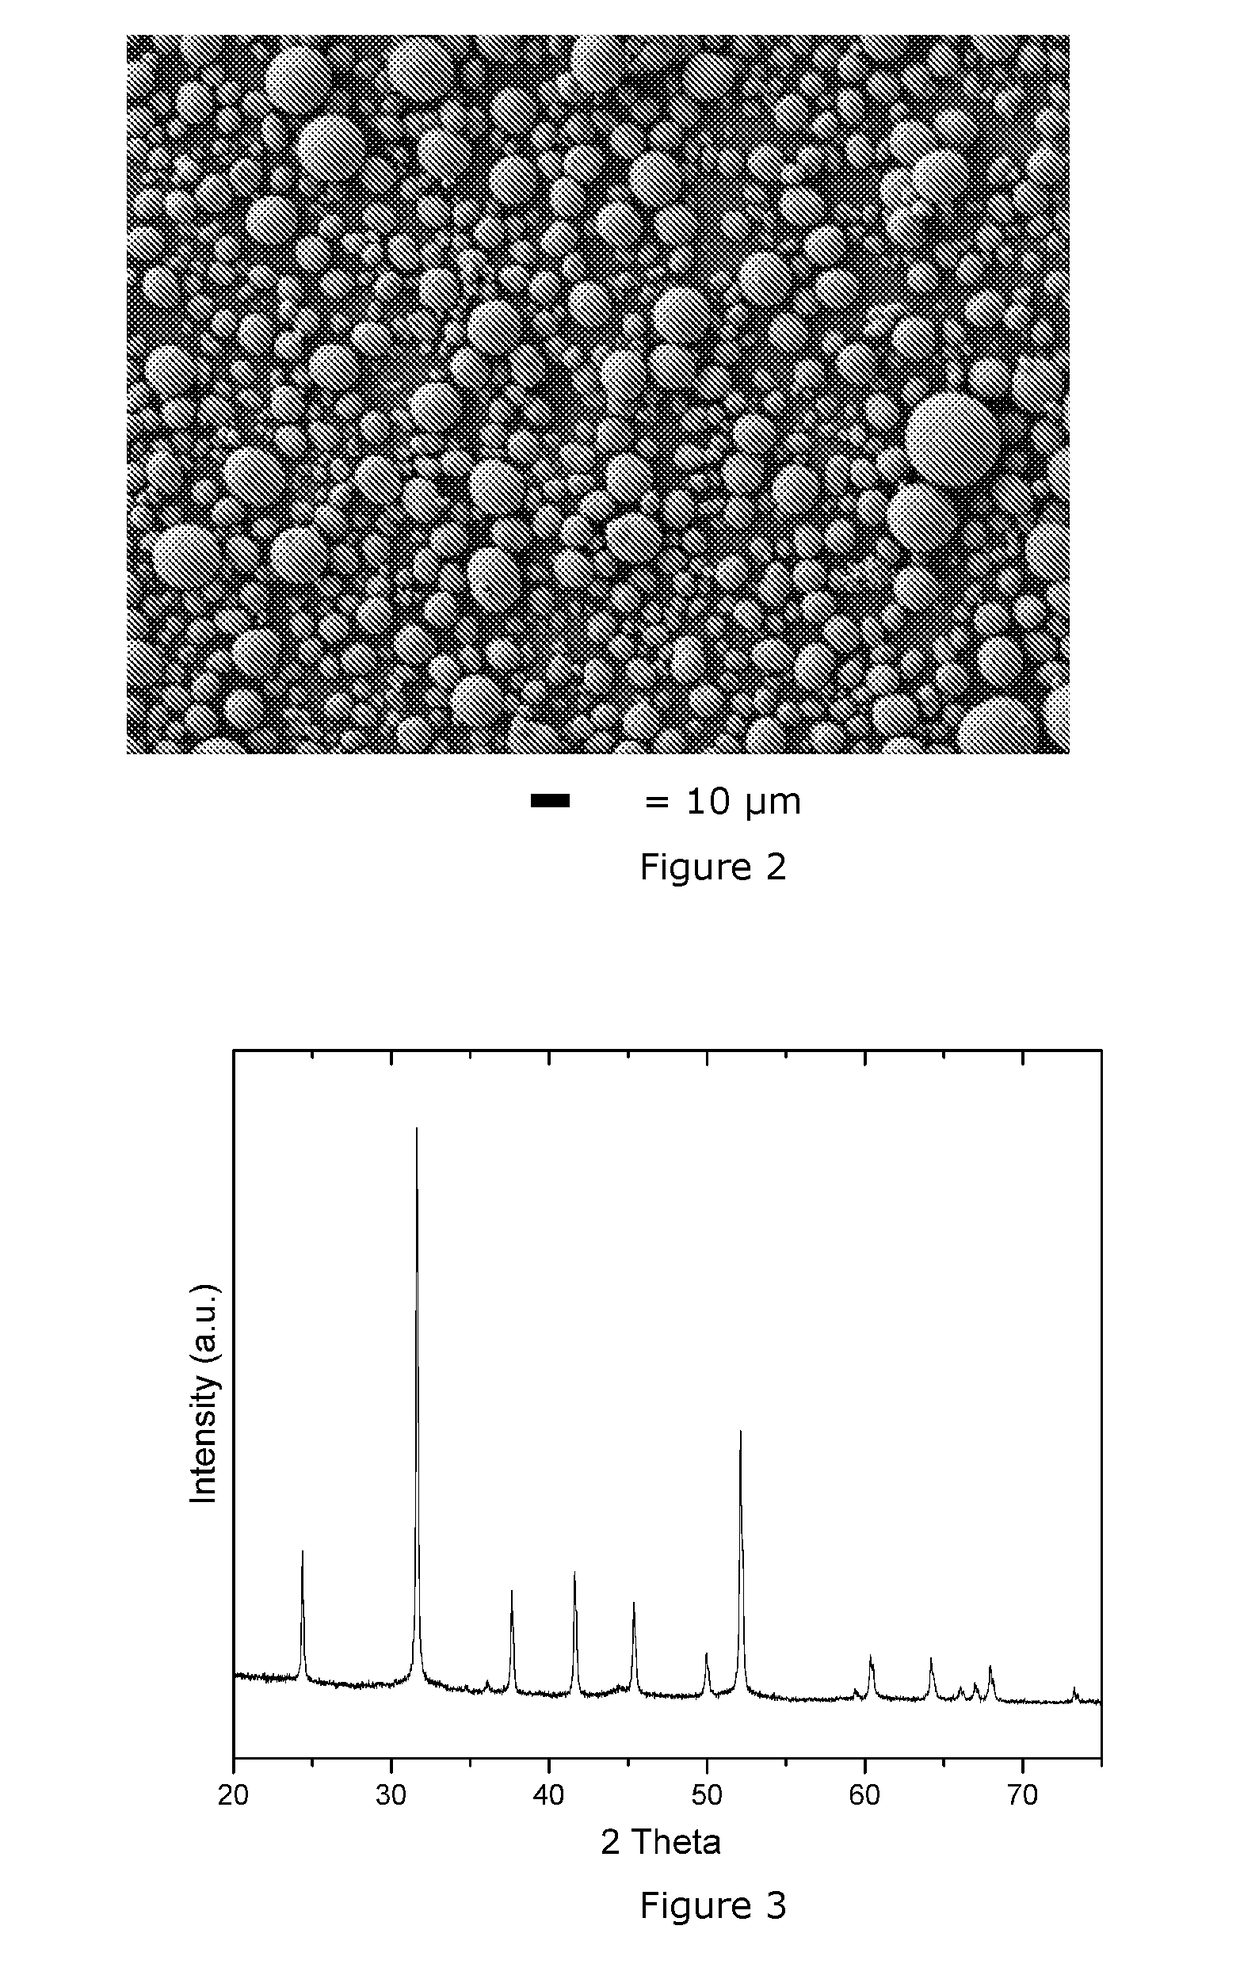 Carbonate Precursors for Lithium Nickel Manganese Cobalt Oxide Cathode Material and the Method of Making Same